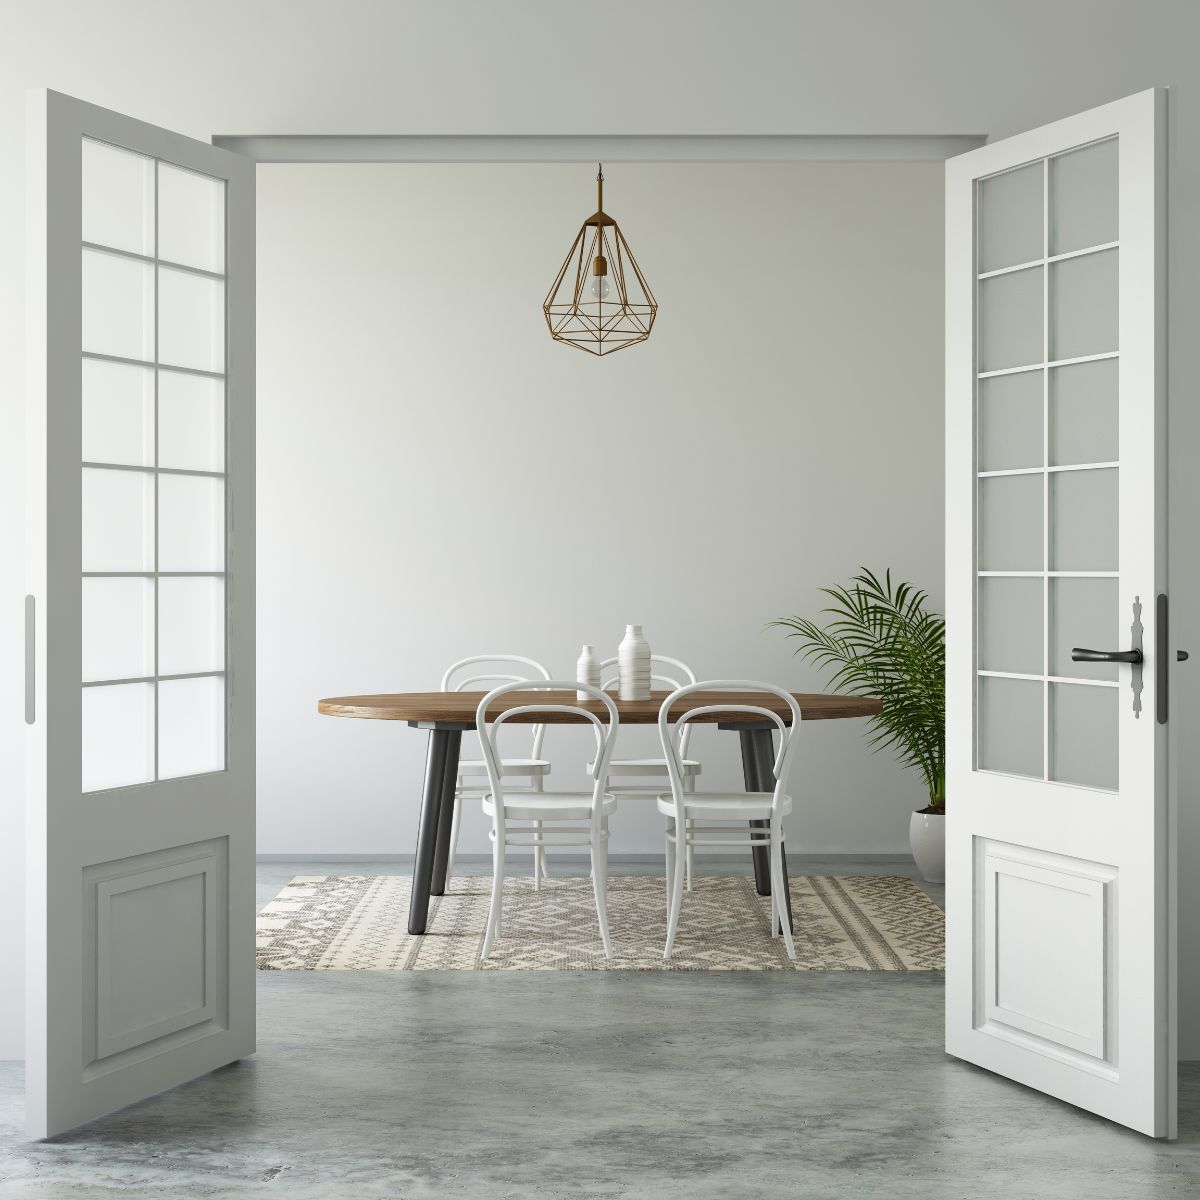 Monochrome vs. Contrast? Interior Door Color Trends & How to Choose the Right One